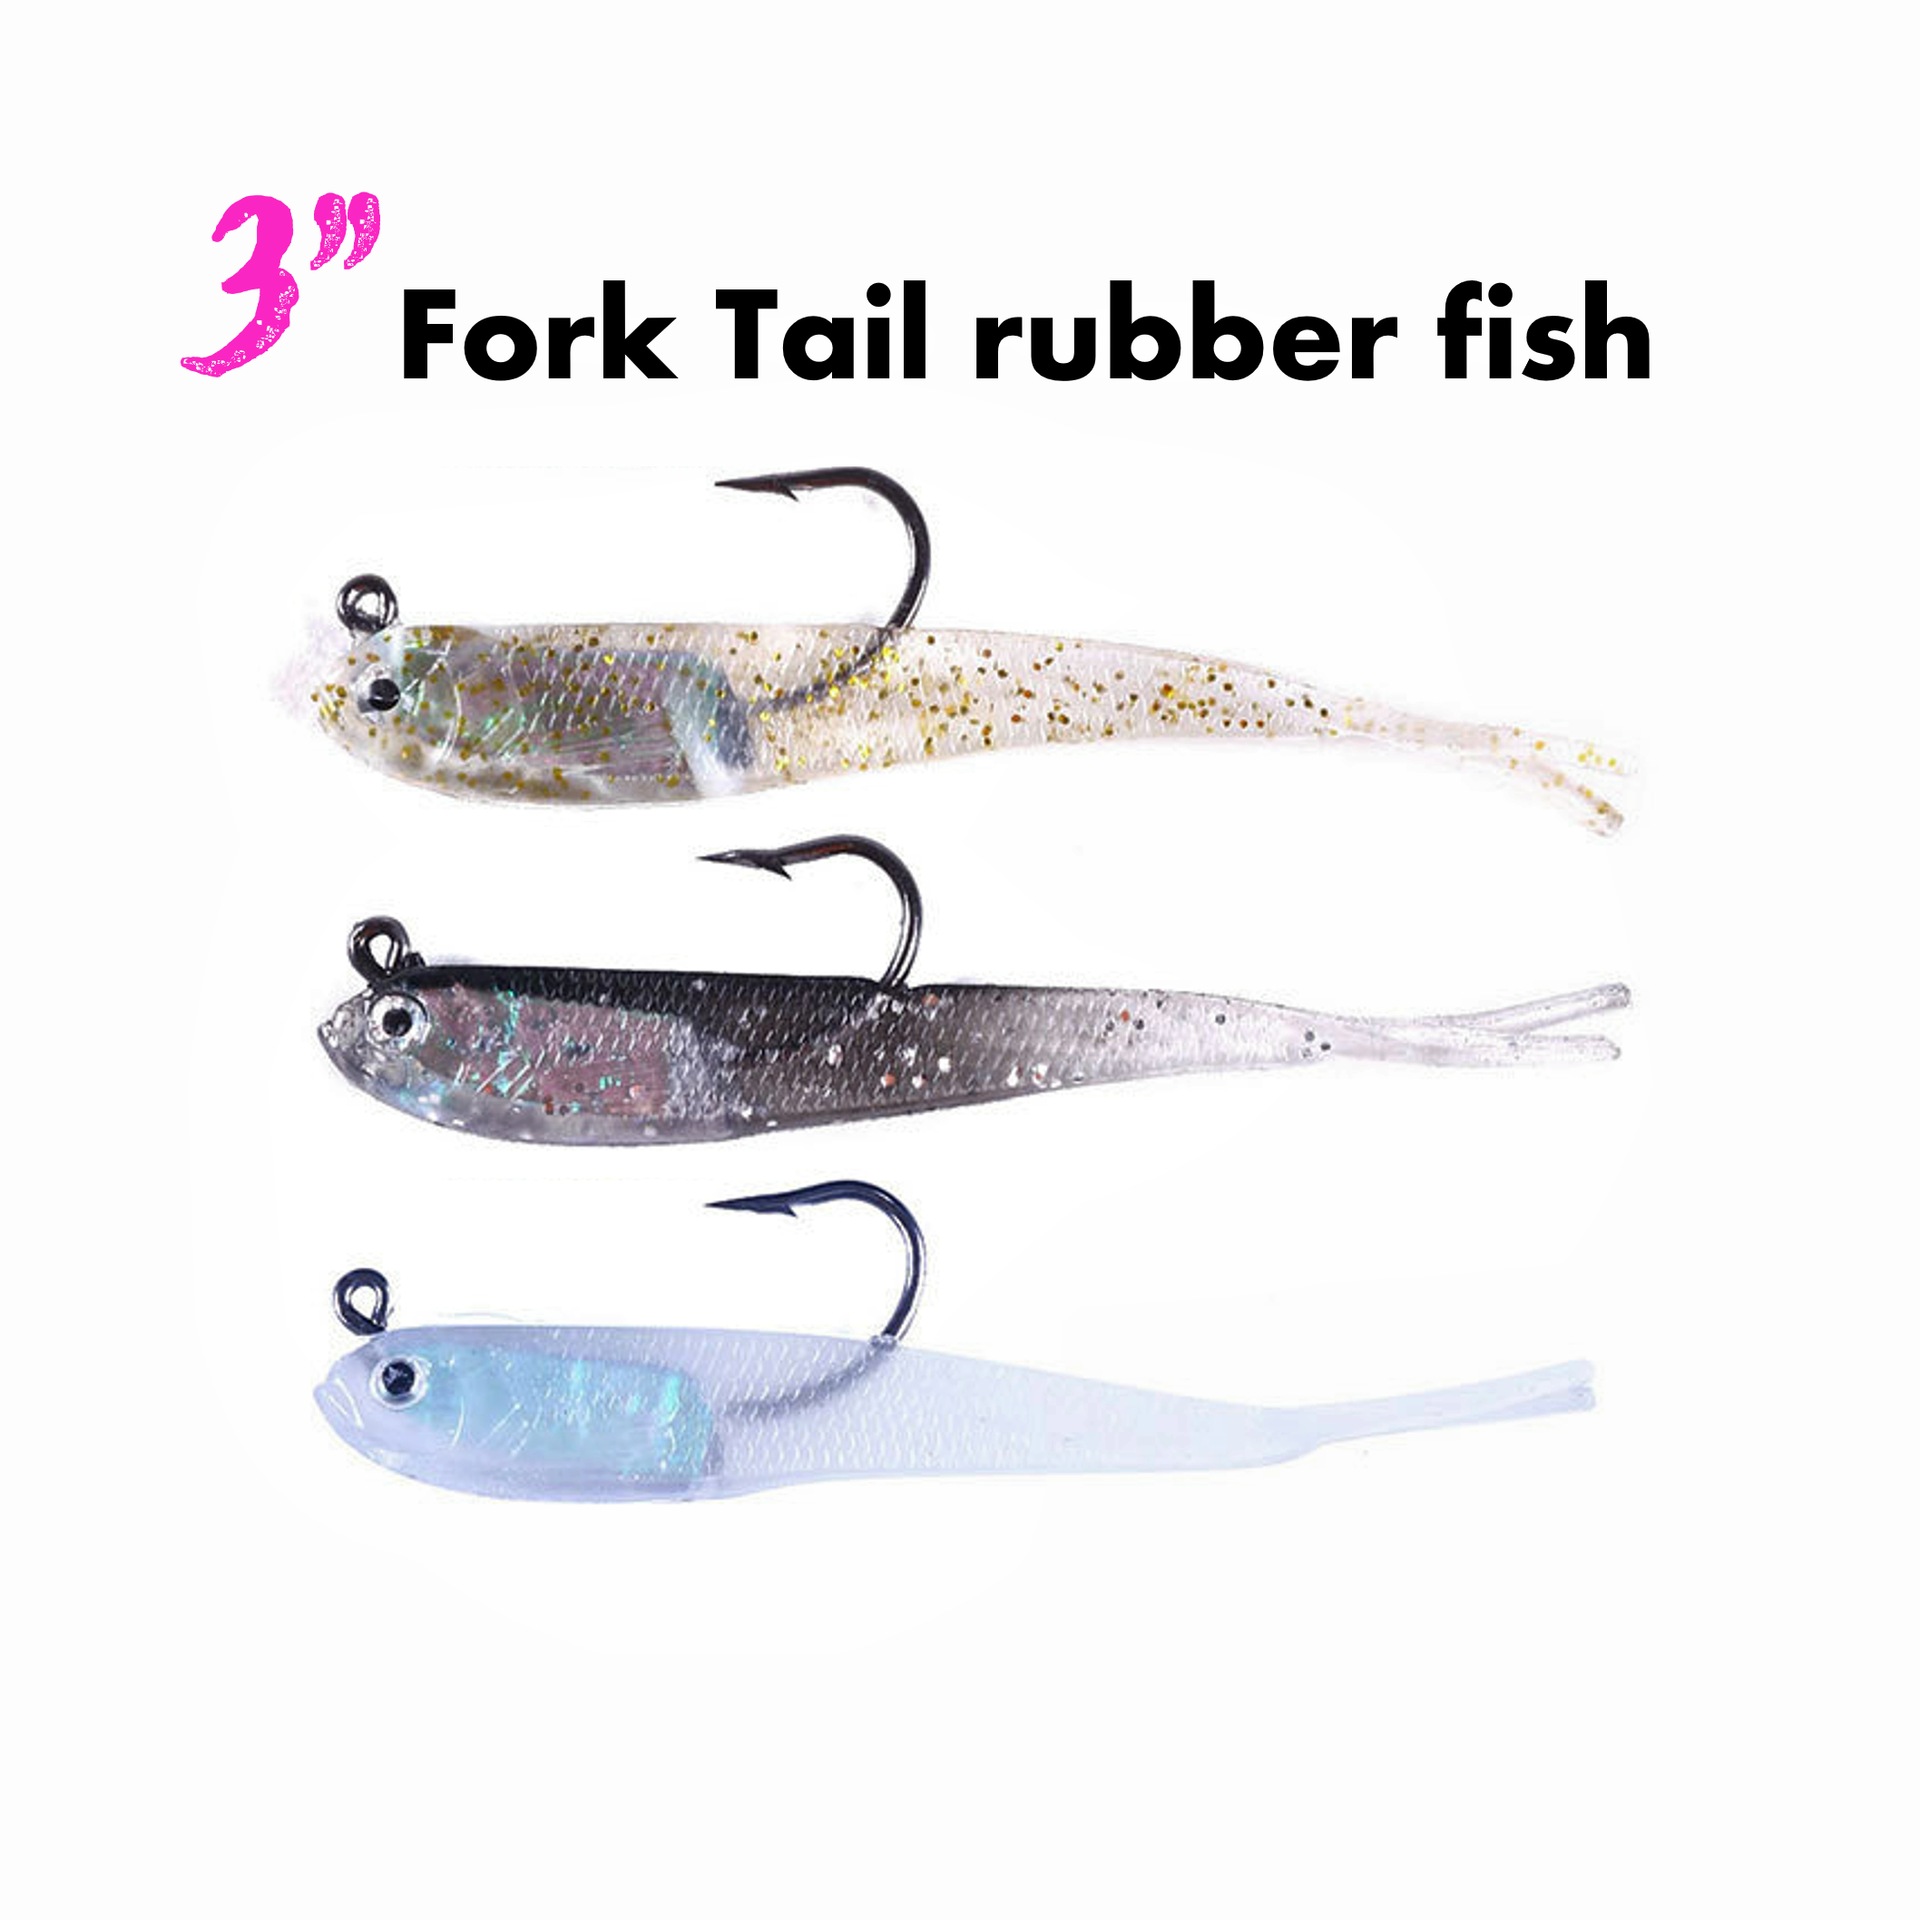 Superse 3 Fork Tail rubber fish – WBQ Tackle supplies